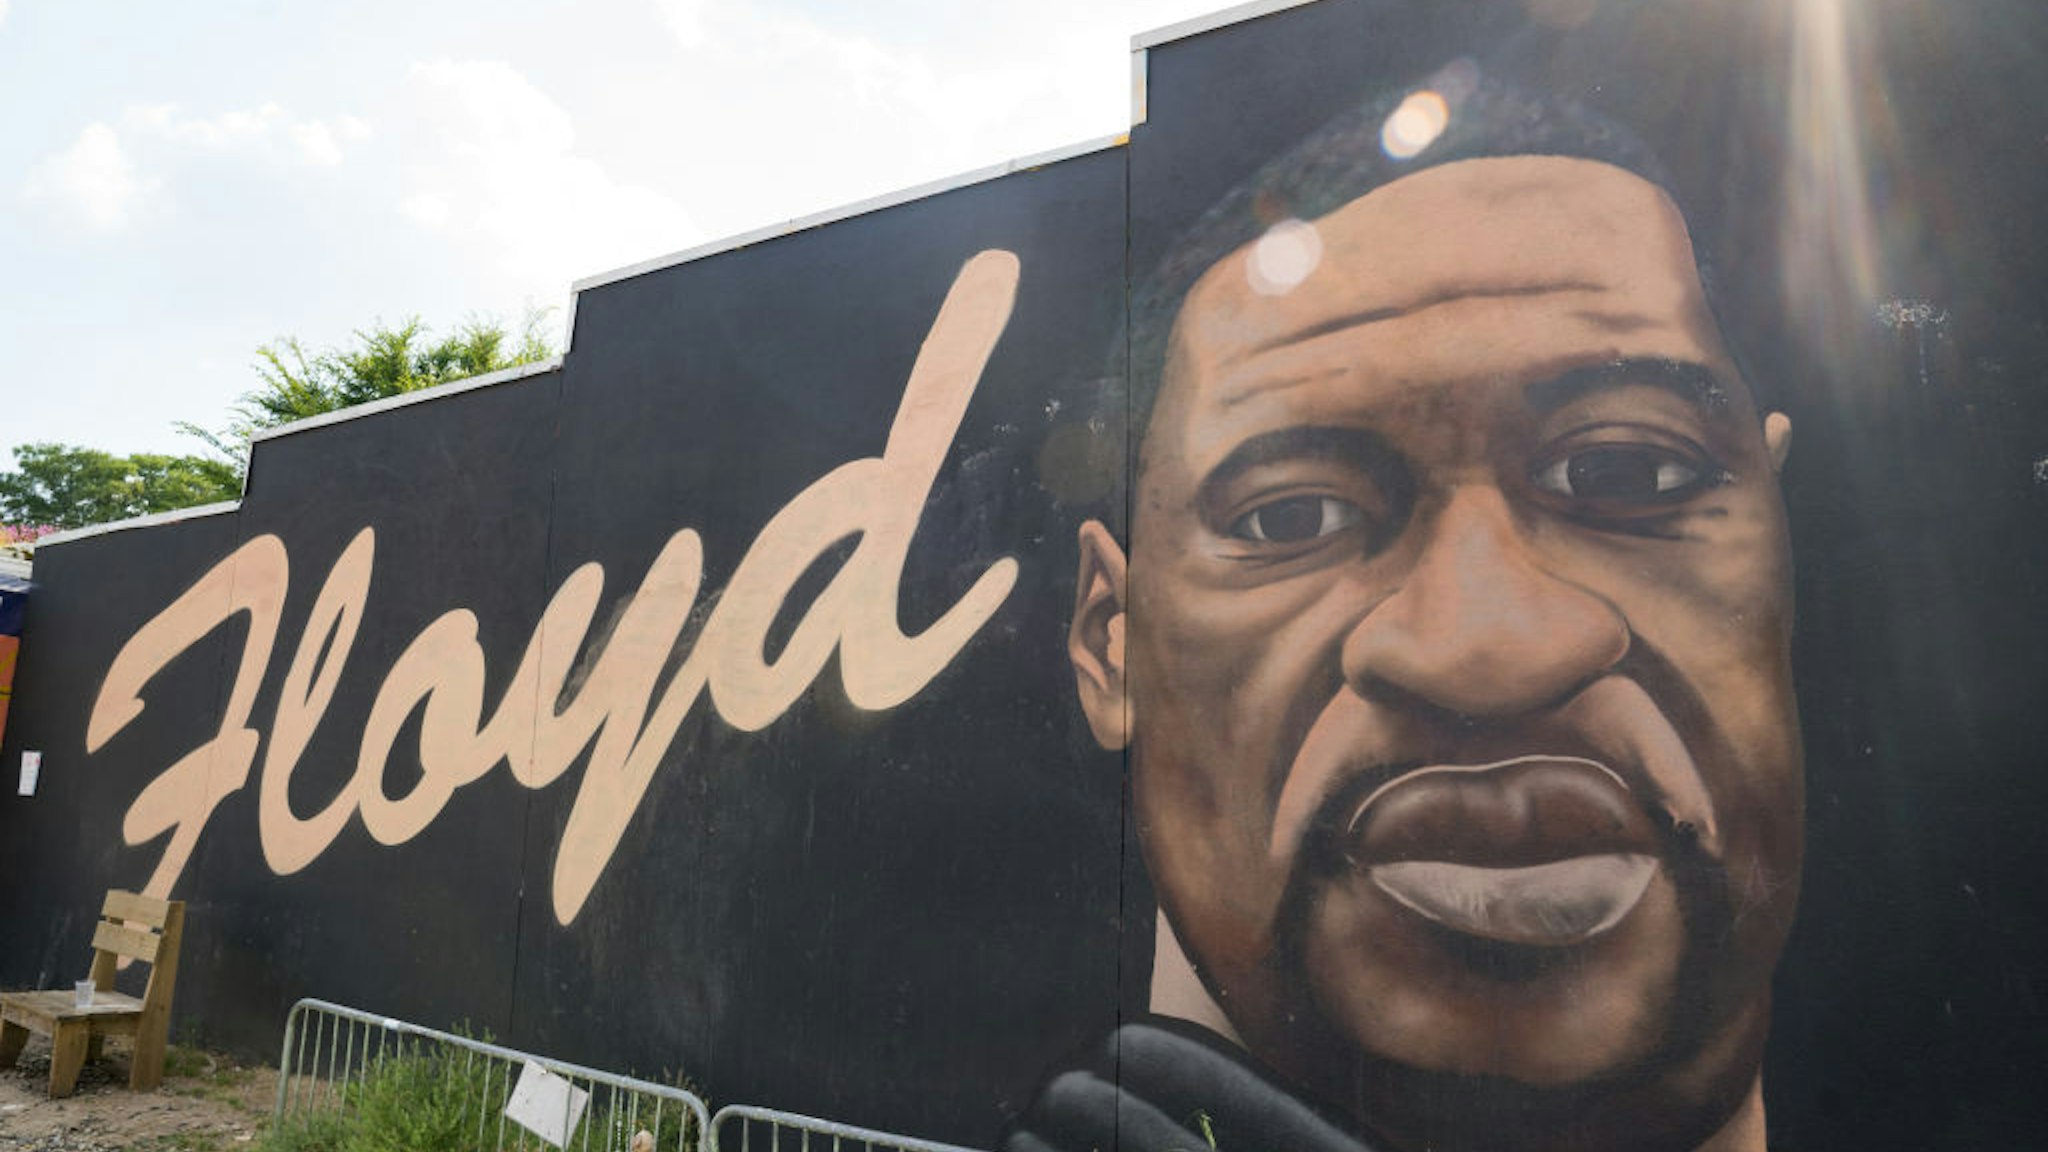 ATLANTA, GA - MAY 25: A mural of George Floyd painted downtown to memorialize the life of George Floyd is shown on the anniversary of his death on May 25, 2021 in Atlanta, Georgia. Floyd's death at the hands of Minneapolis police officer Derek Chauvin sparked protests and movements around the world. (Photo by Megan Varner/Getty Images)